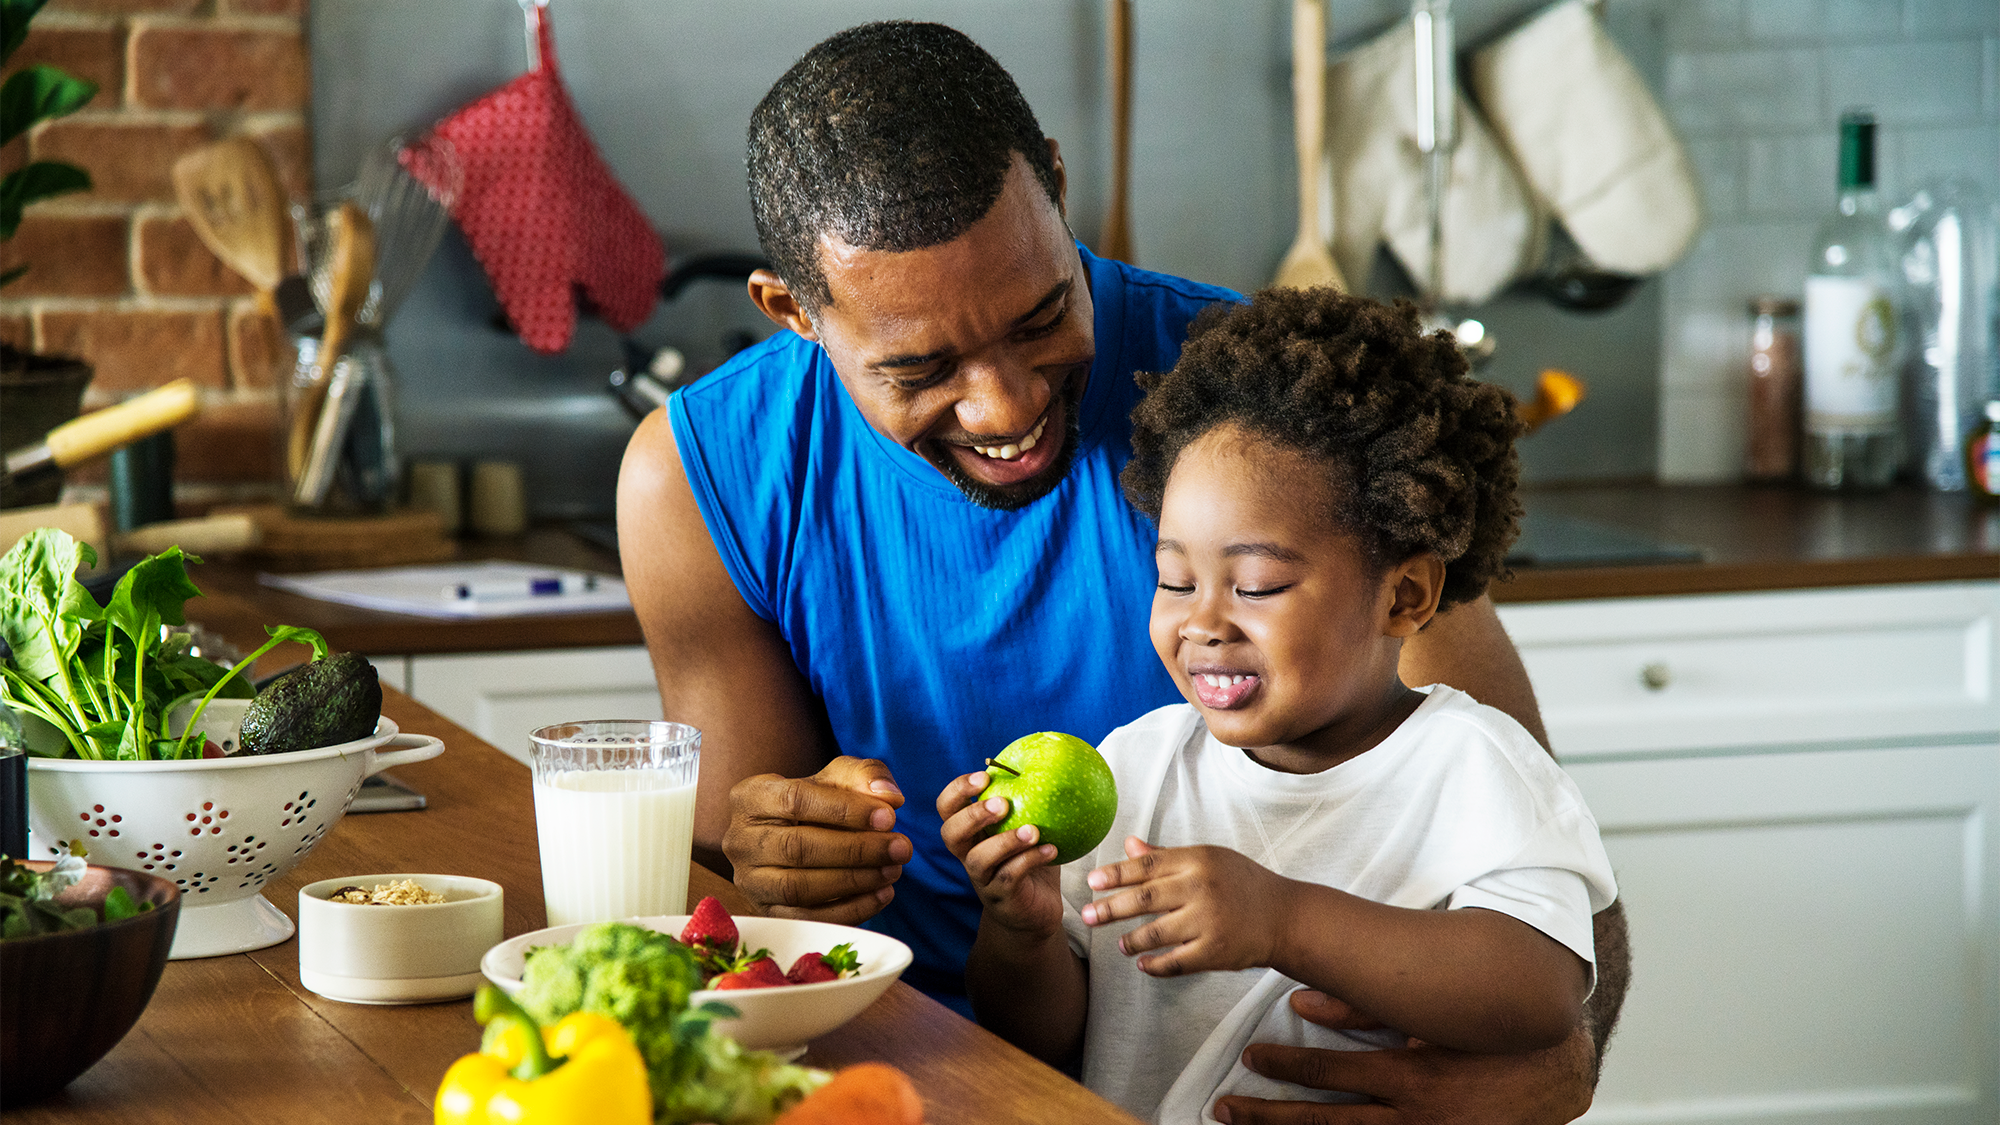 A father and young child interact in a kitchen